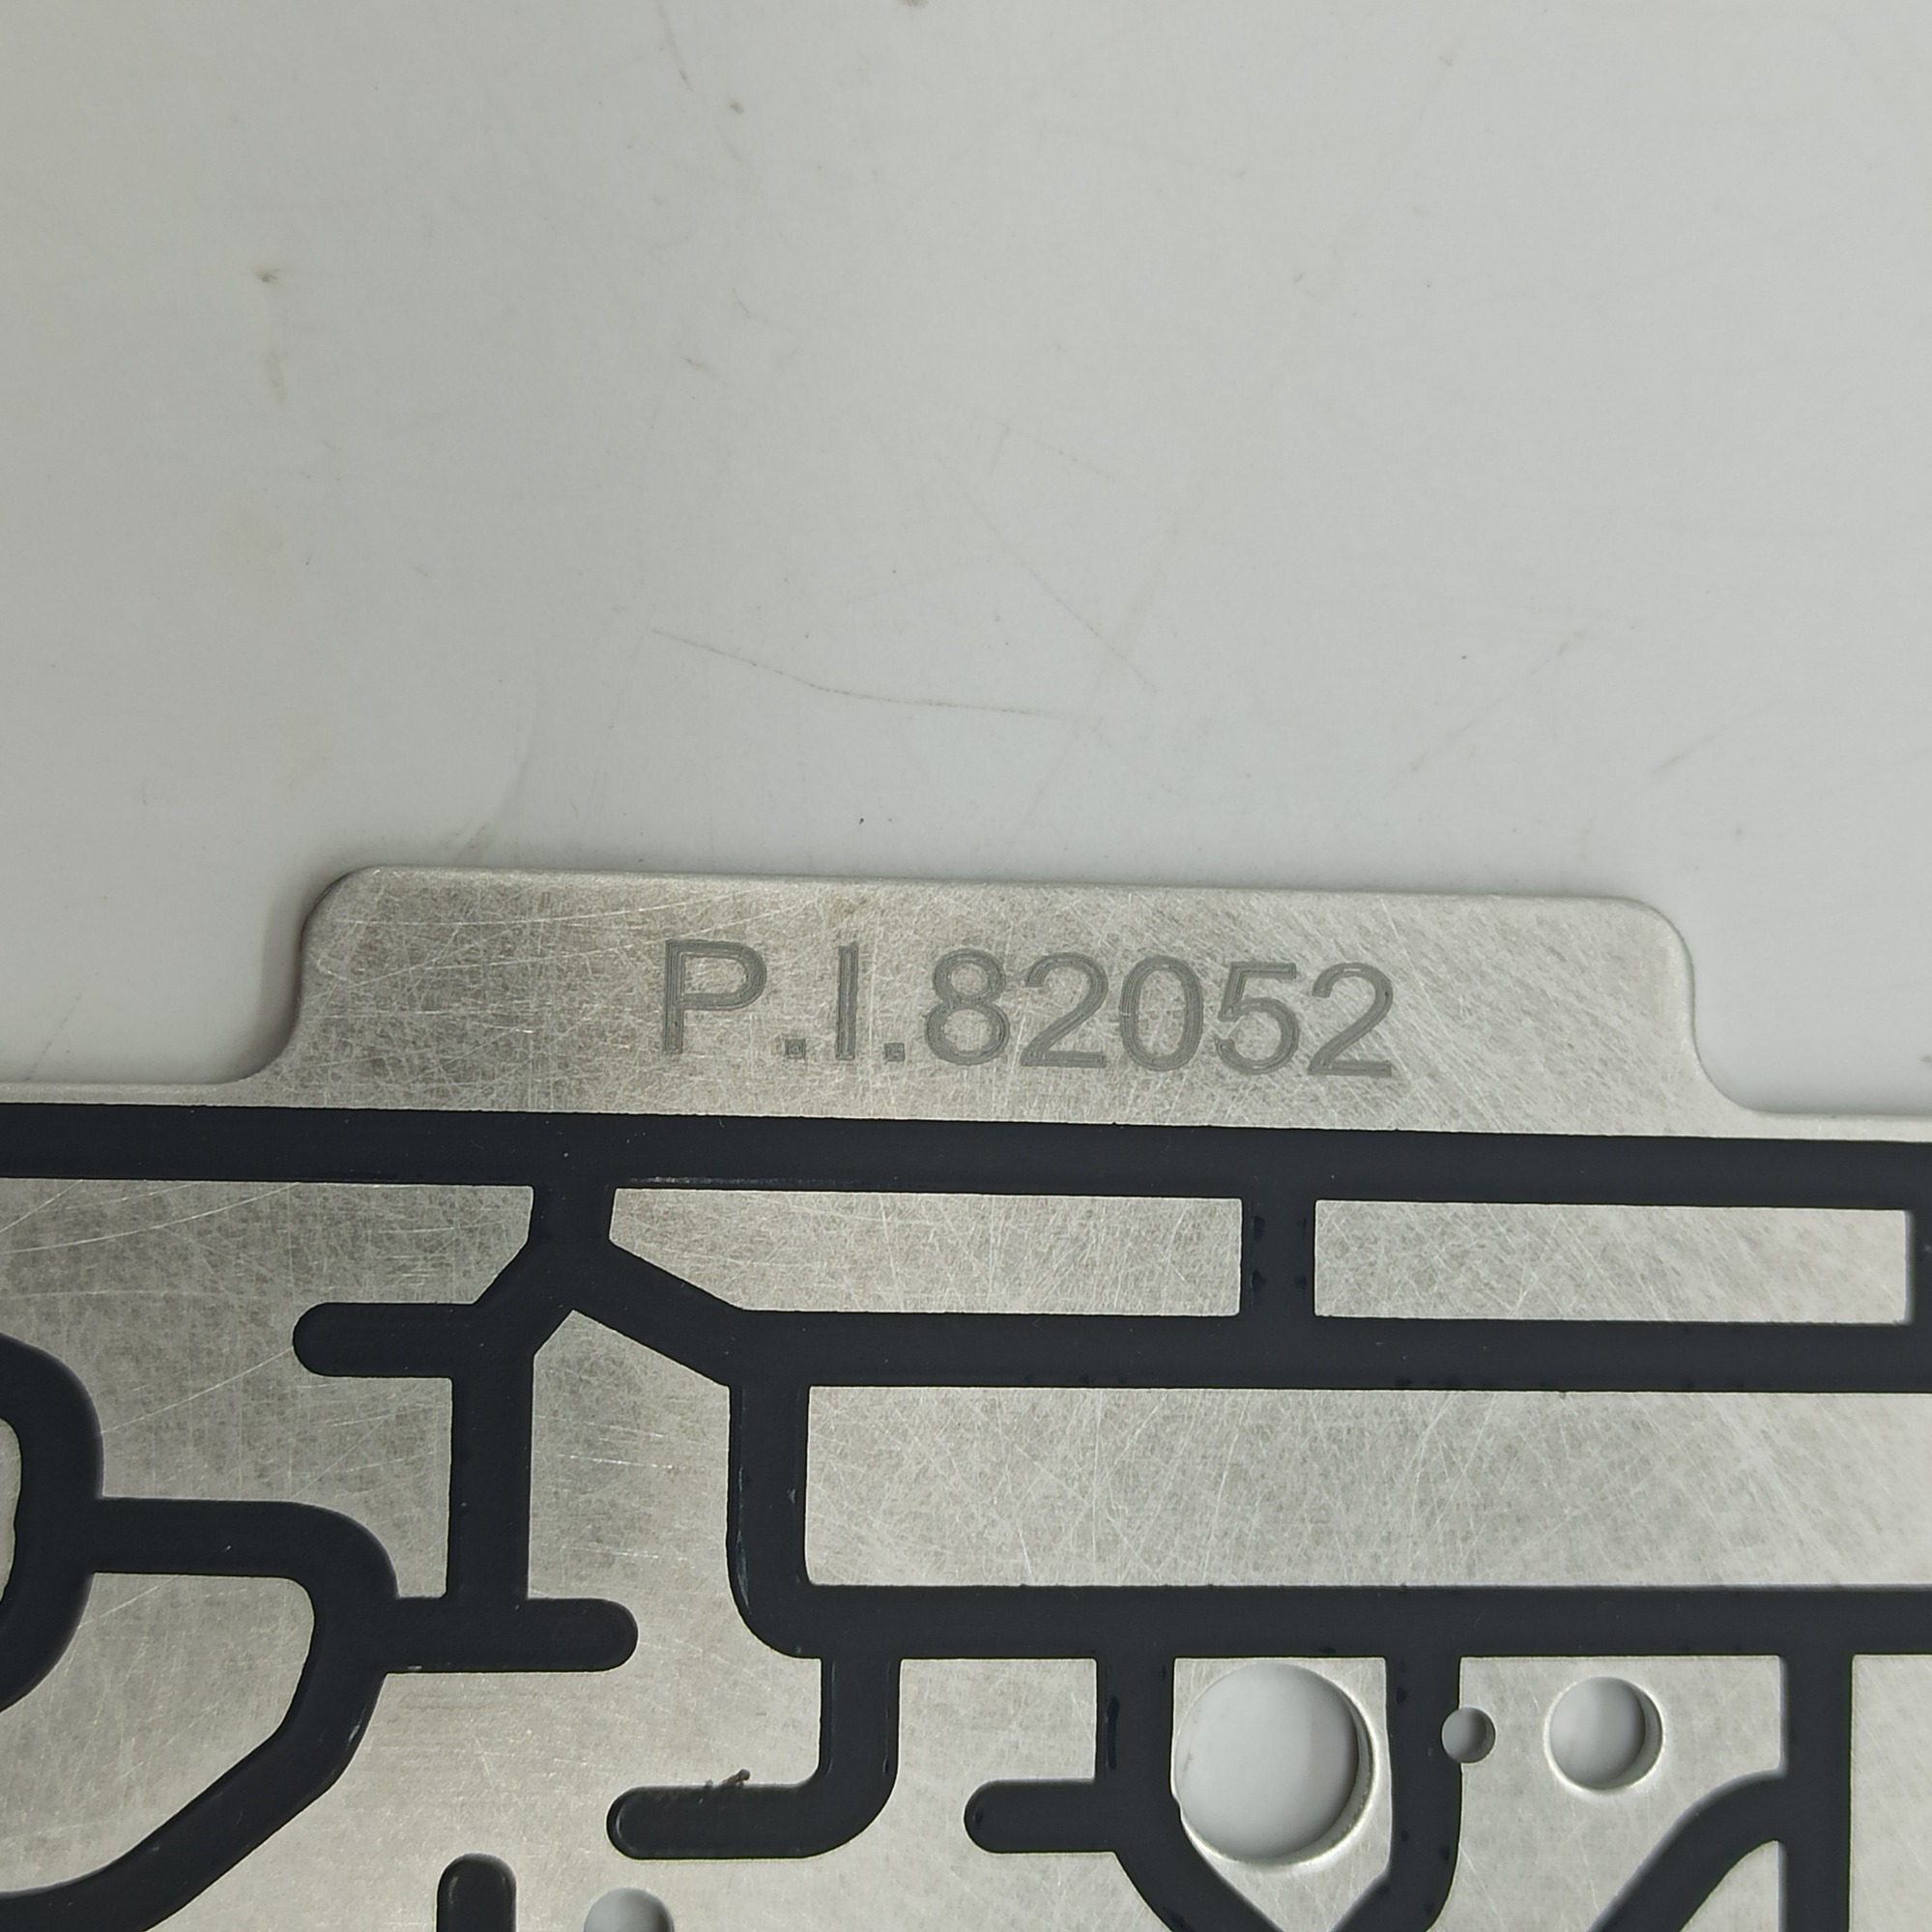 ZF6HP valve body separate plate A052 B052 6HP-0012-OEM